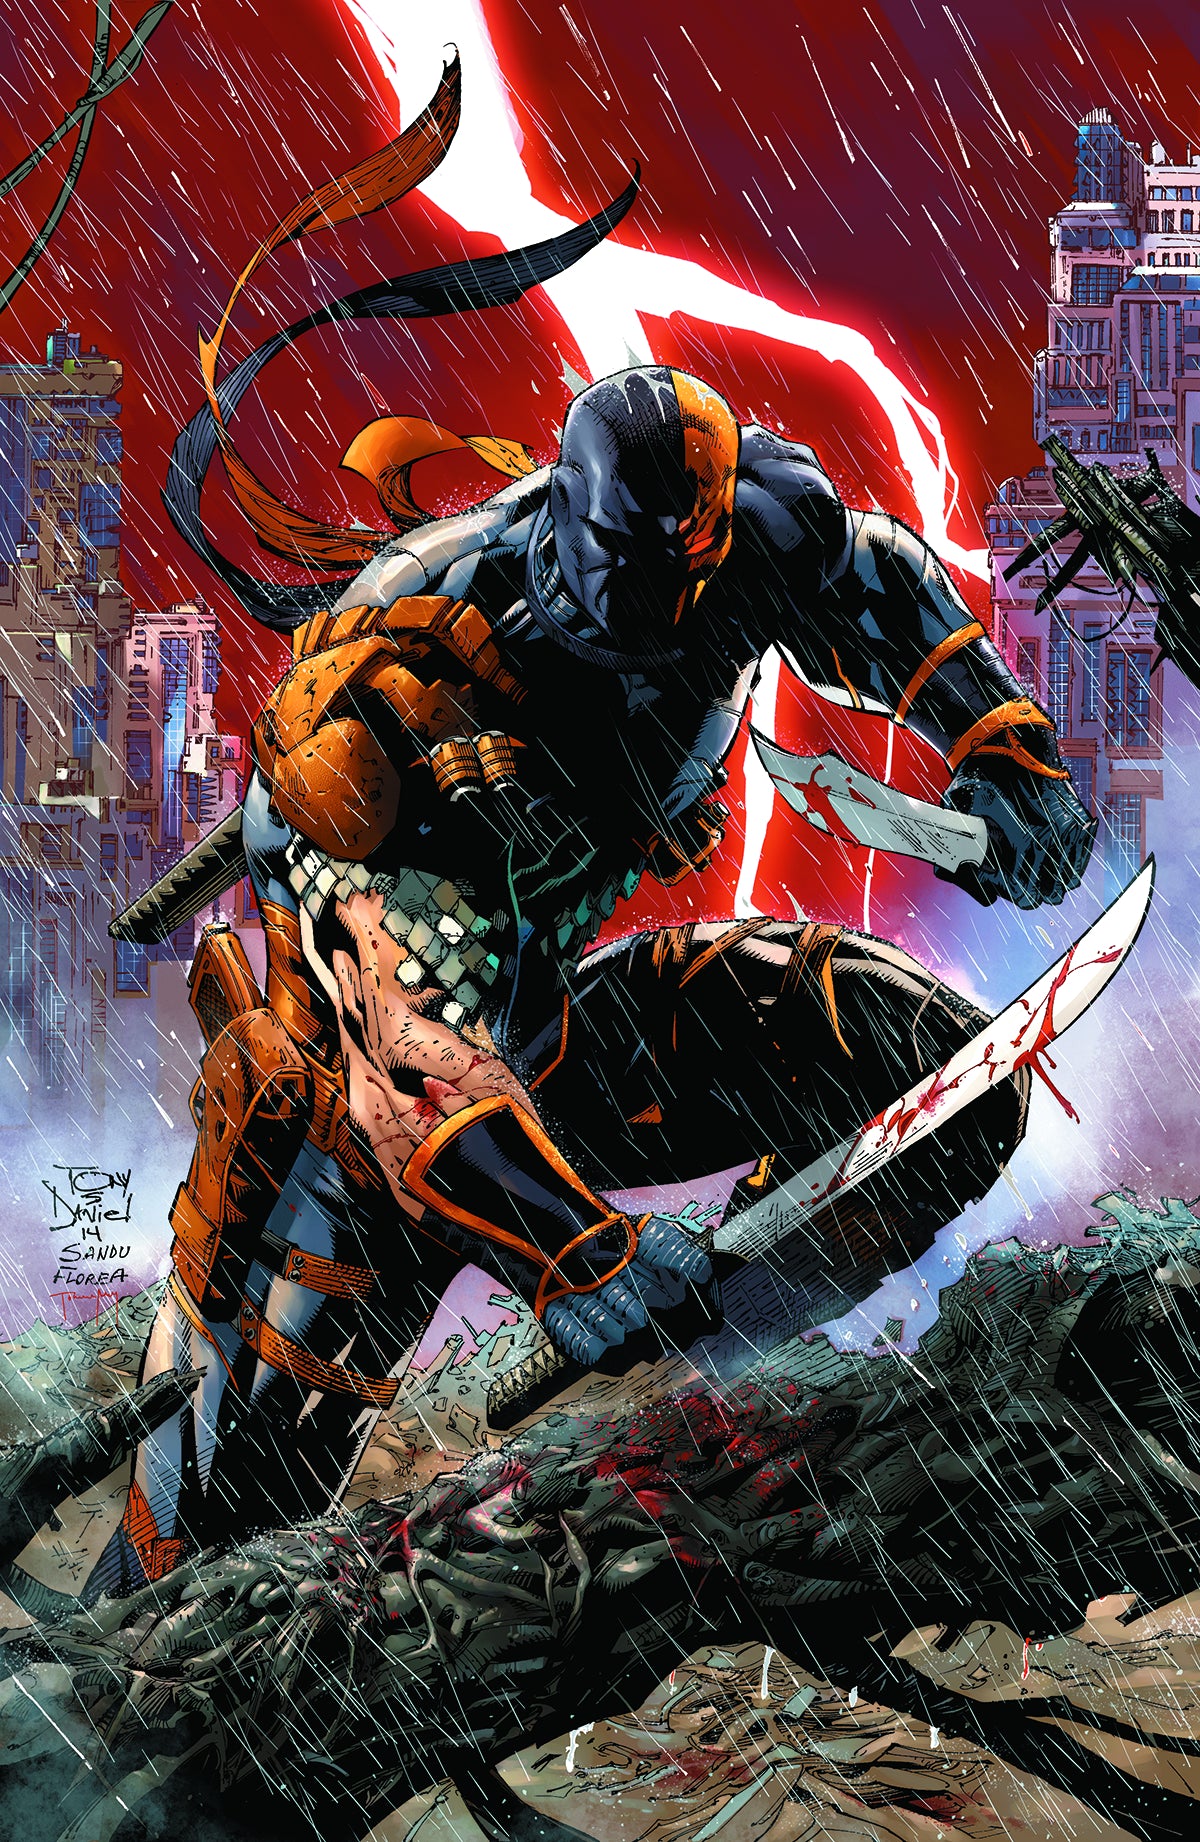 Photo of Deathstroke Issue 1 comic sold by Stronghold Collectibles